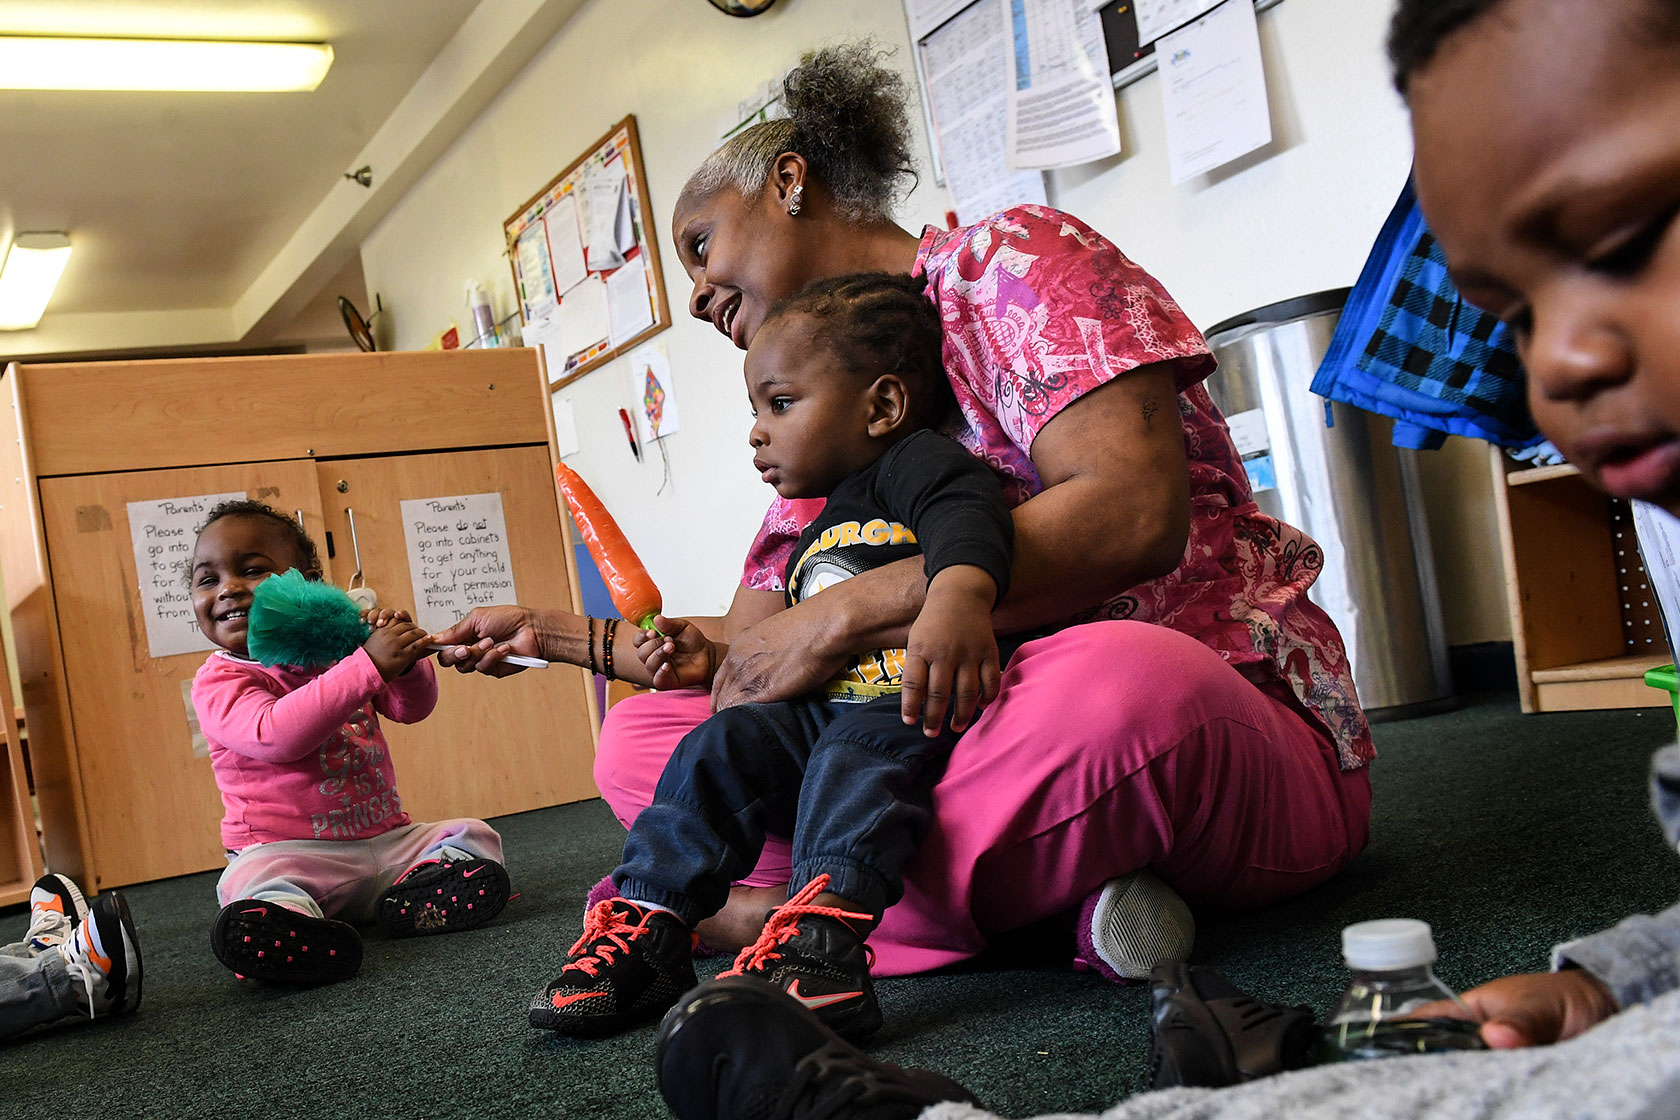 A child care worker engages children during an activity.